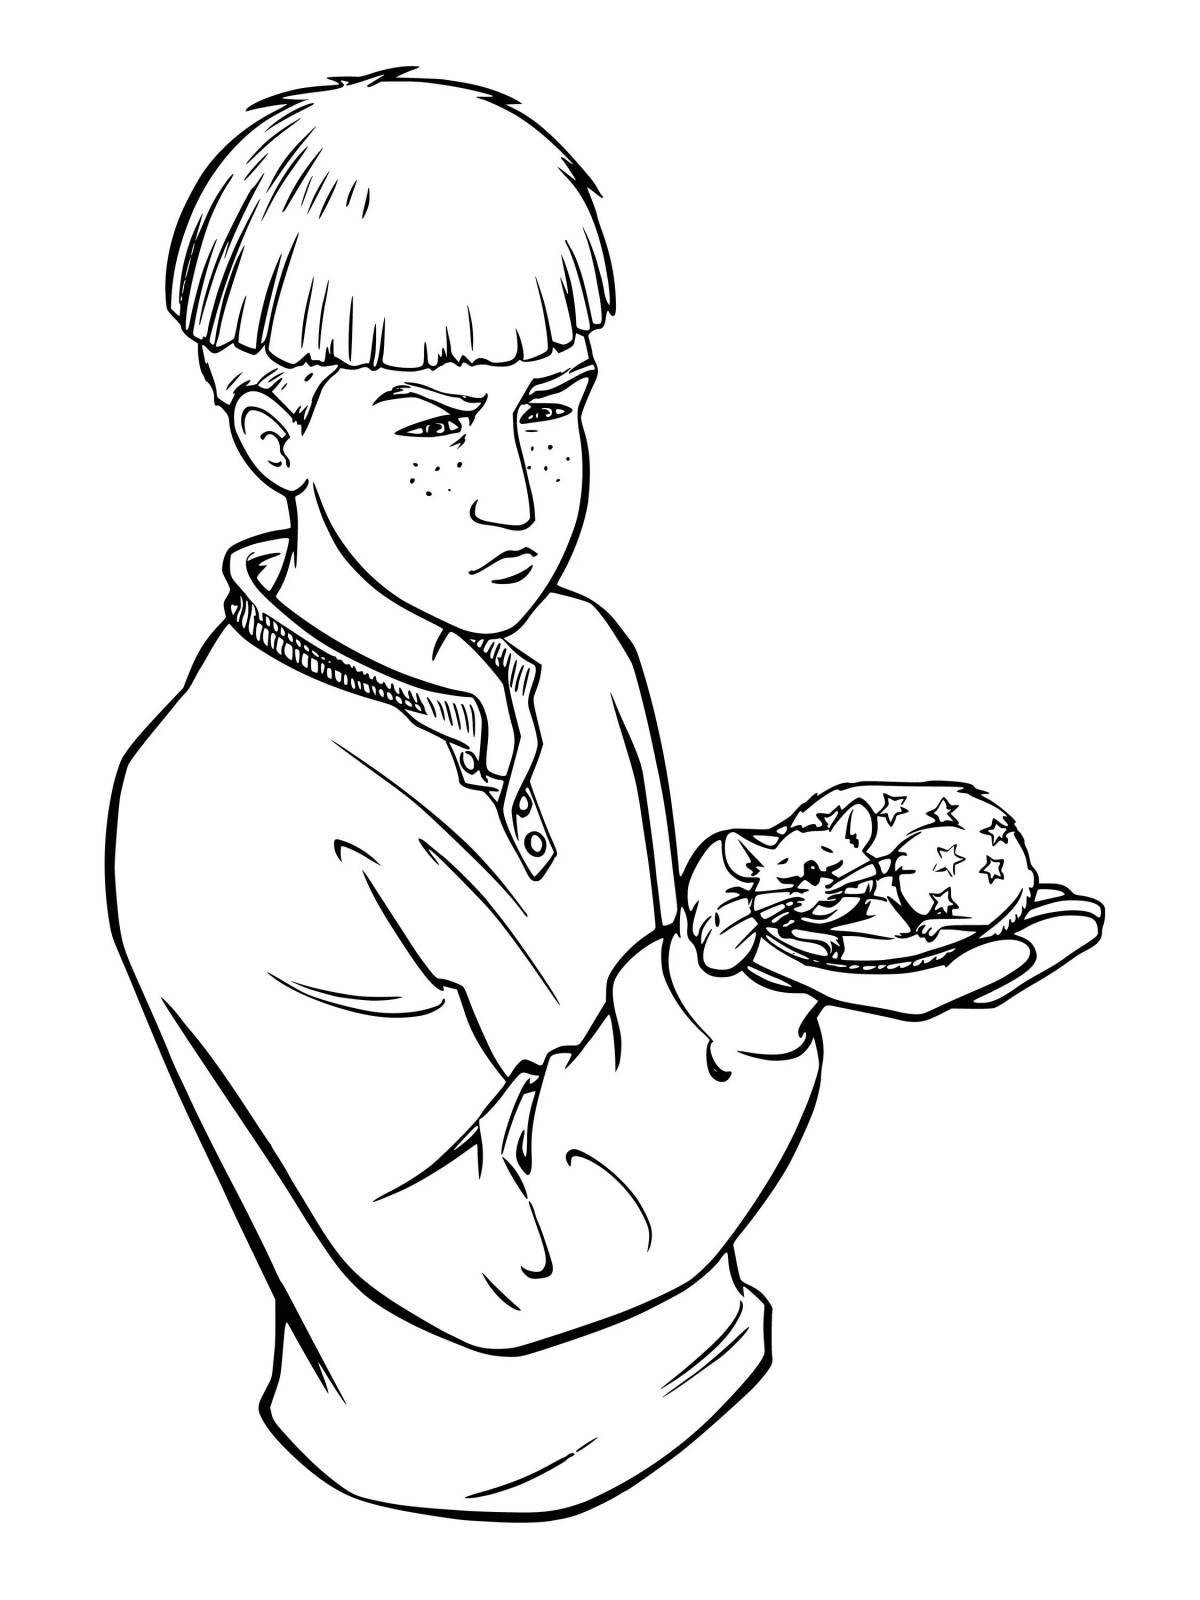 Ron love coloring page